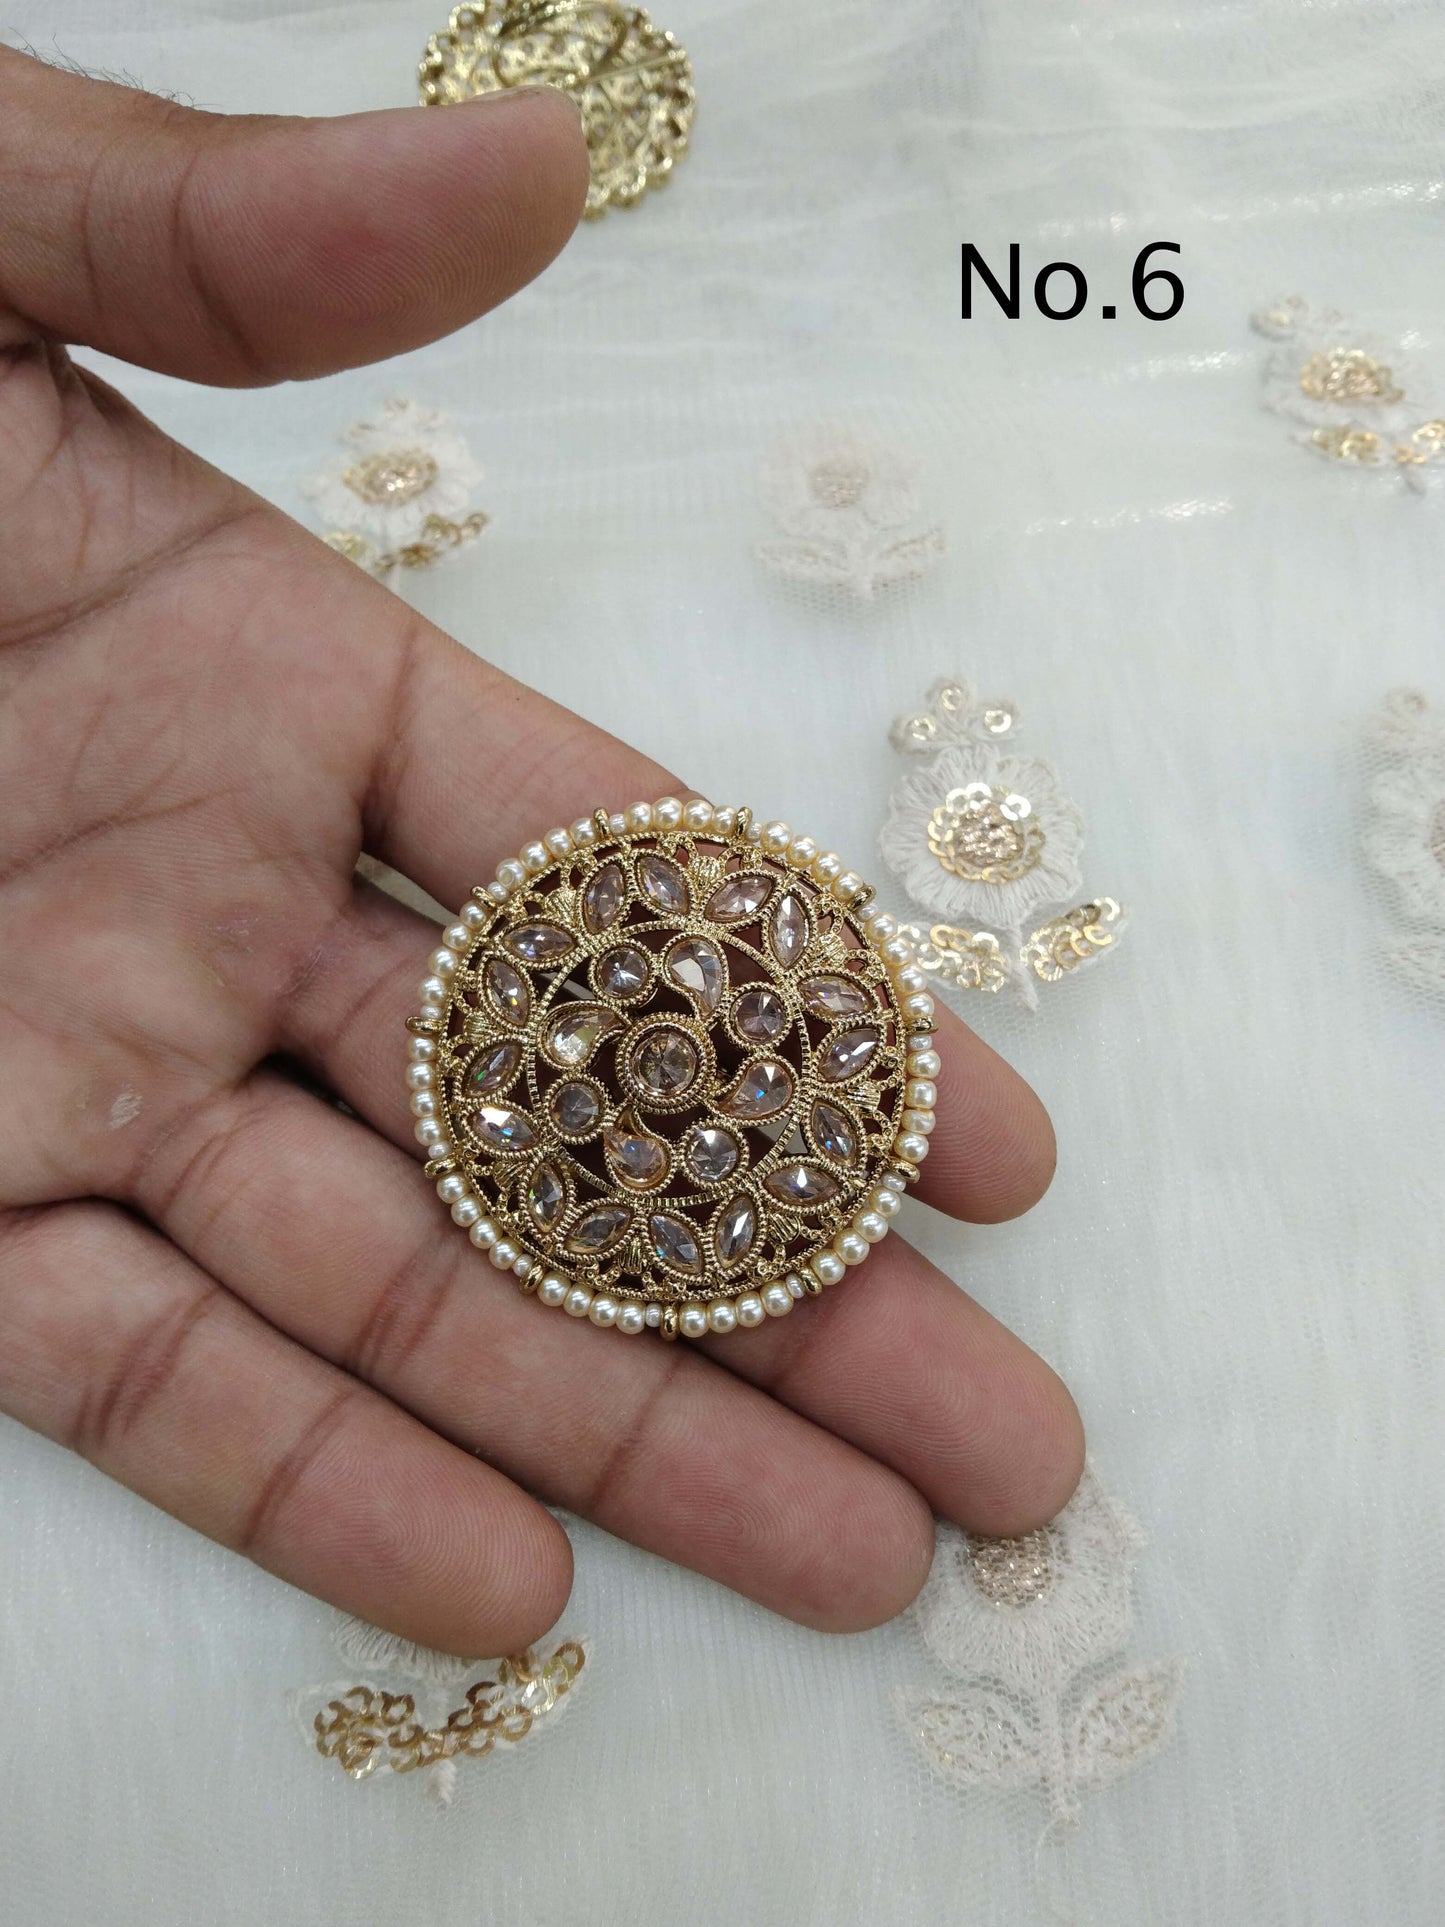 Indian Ring /Antique gold finger rings Big round bridal ring hand accessory/sili